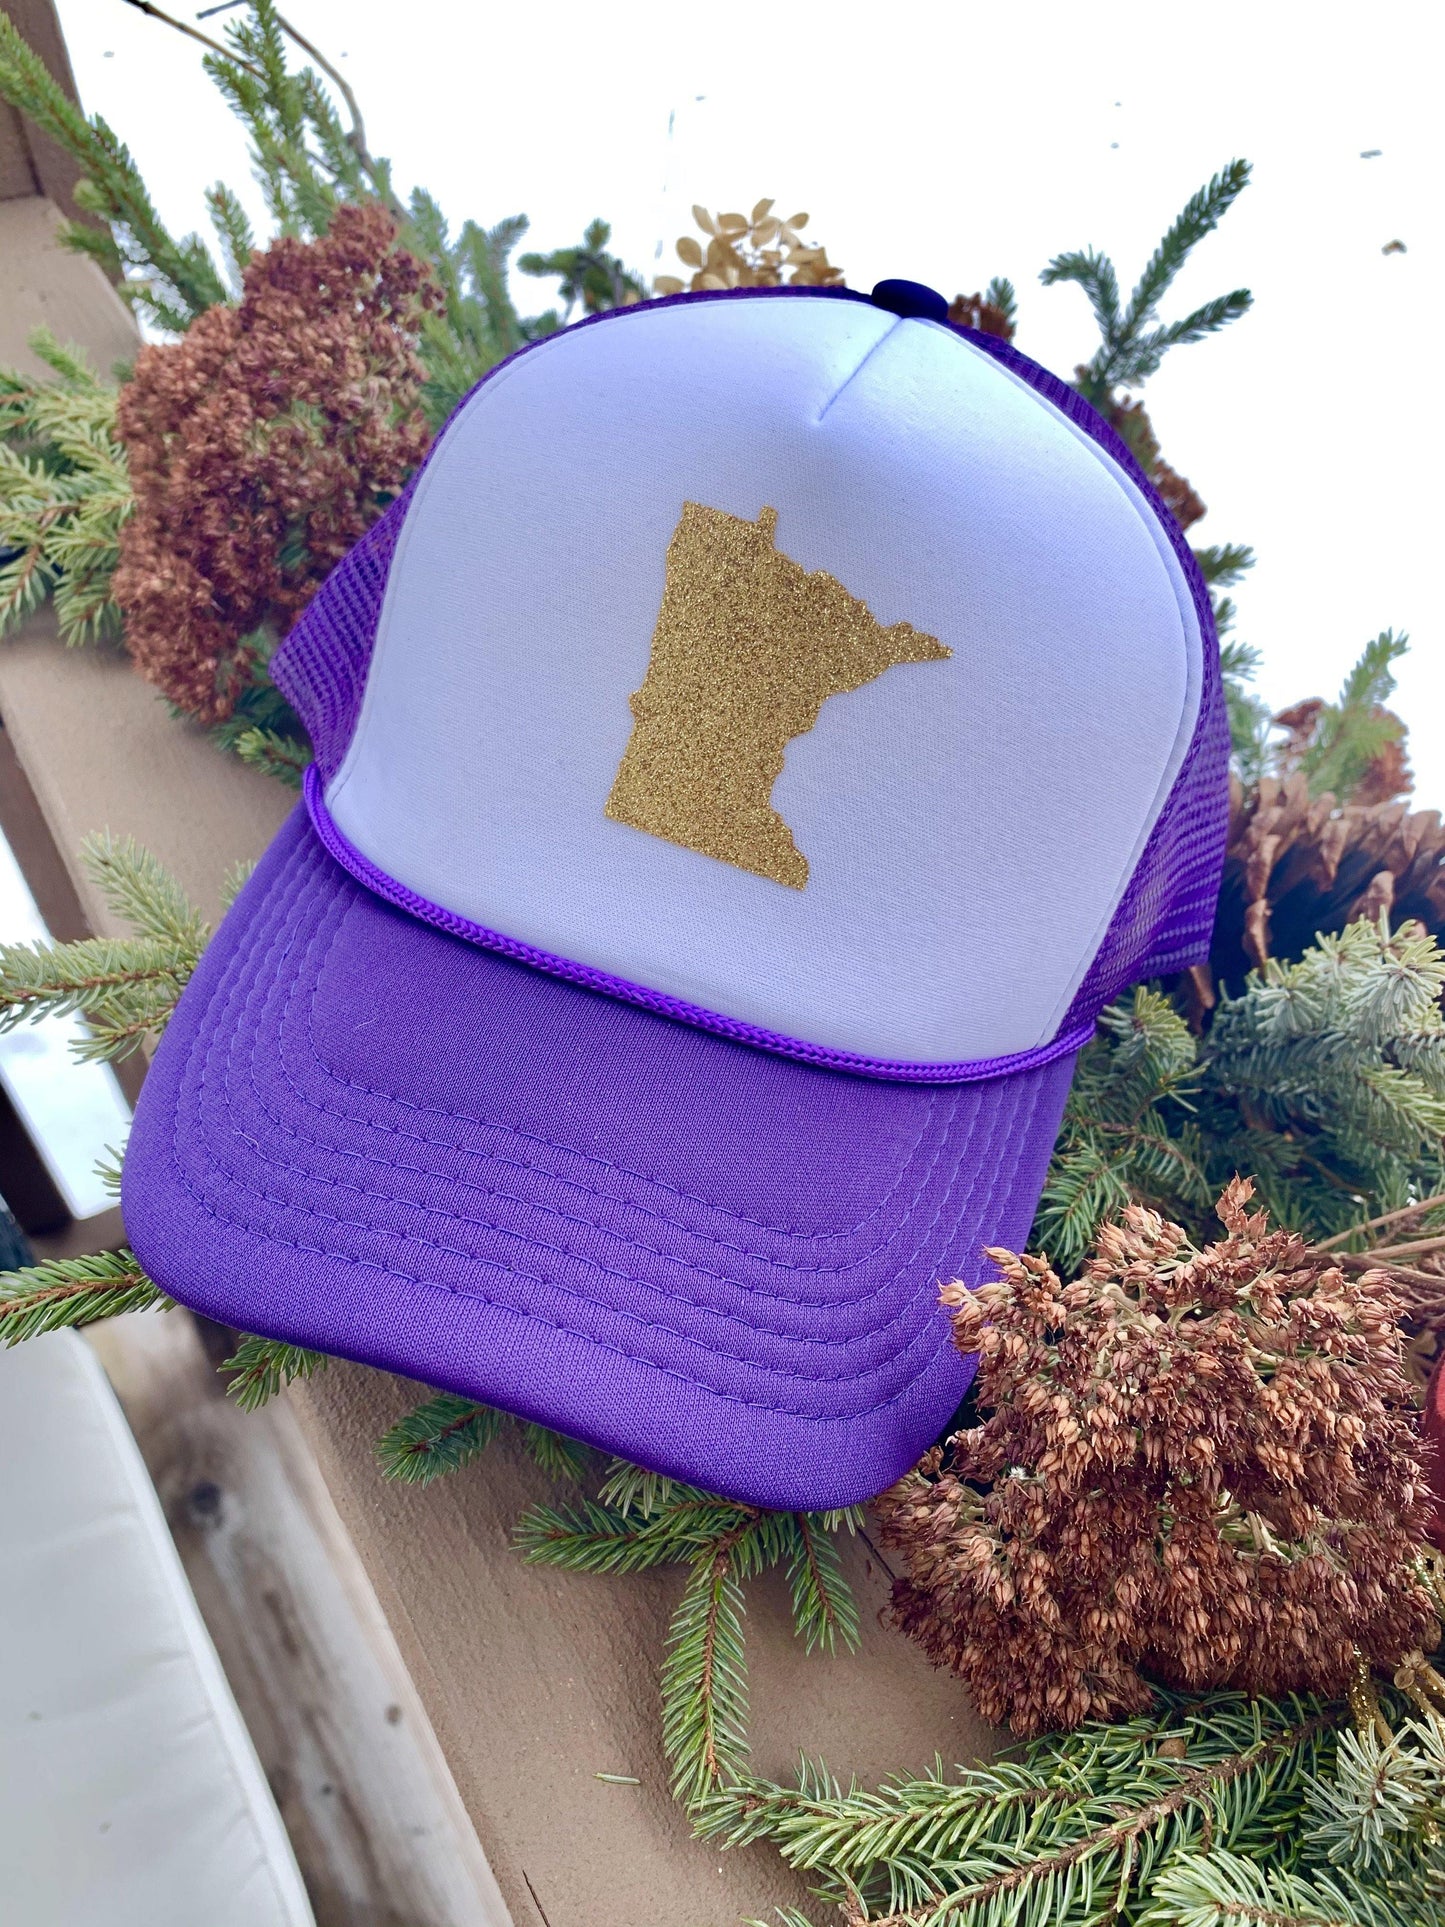 Hats { Minnesota } Sota Clothing Co. Heather gray and black embroidered paddle patch unisex Richardson 112 adjustable snapback. Assorted styles. Free jewel with order! Sota. Augsburg. MN 32. - Stacy's Pink Martini Boutique